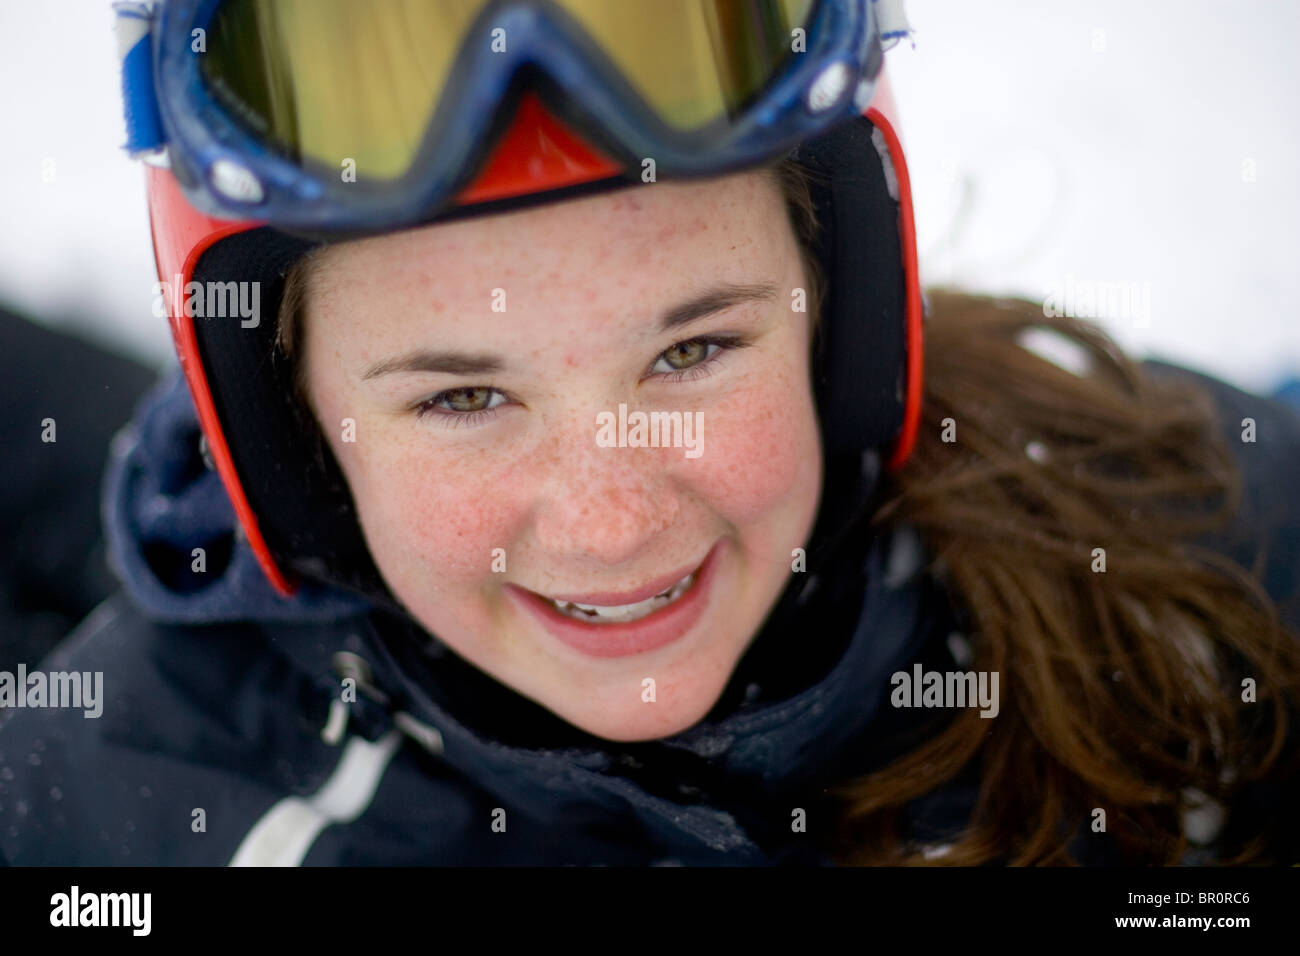 A young woman on vacation snowboarding smiles at Sunday River ski resory in Bethel, Maine. Stock Photo